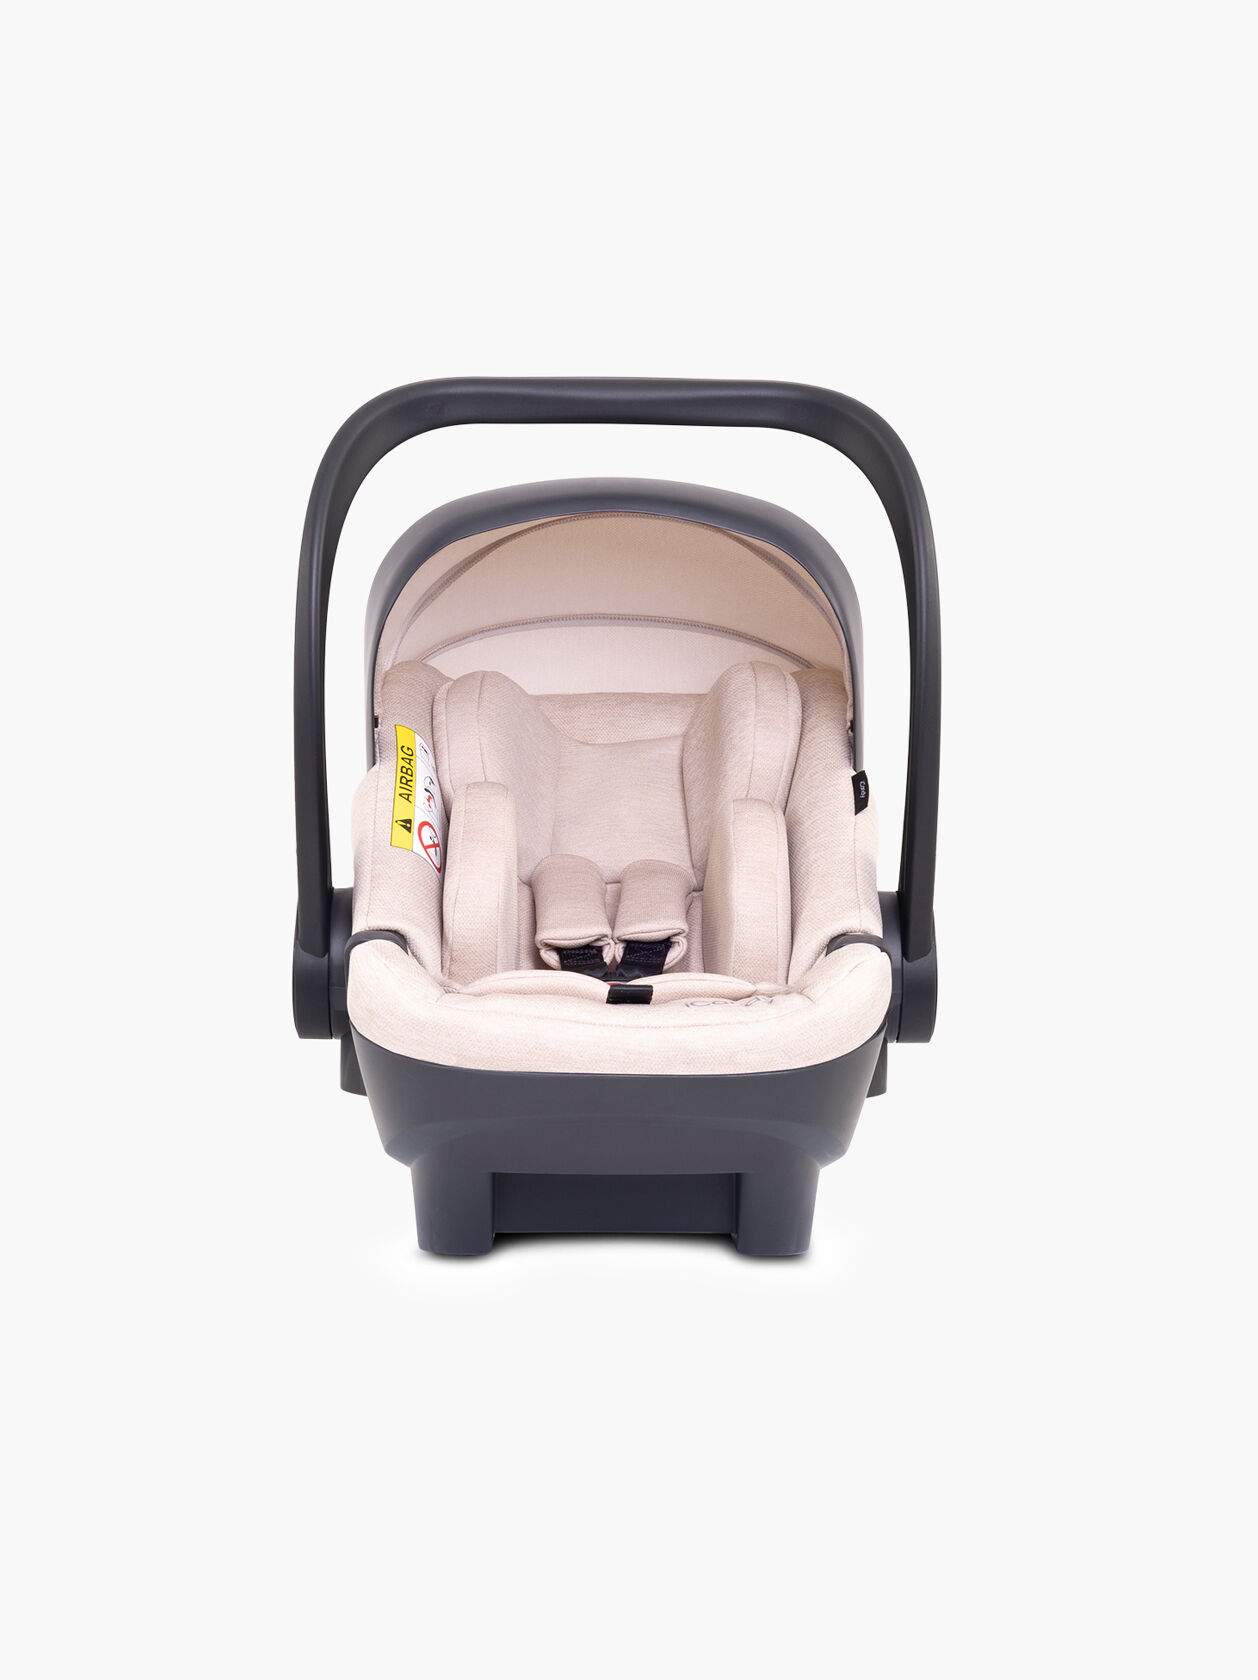 Peach 7 Pushchair and Carrycot - Complete Car Seat Bundle